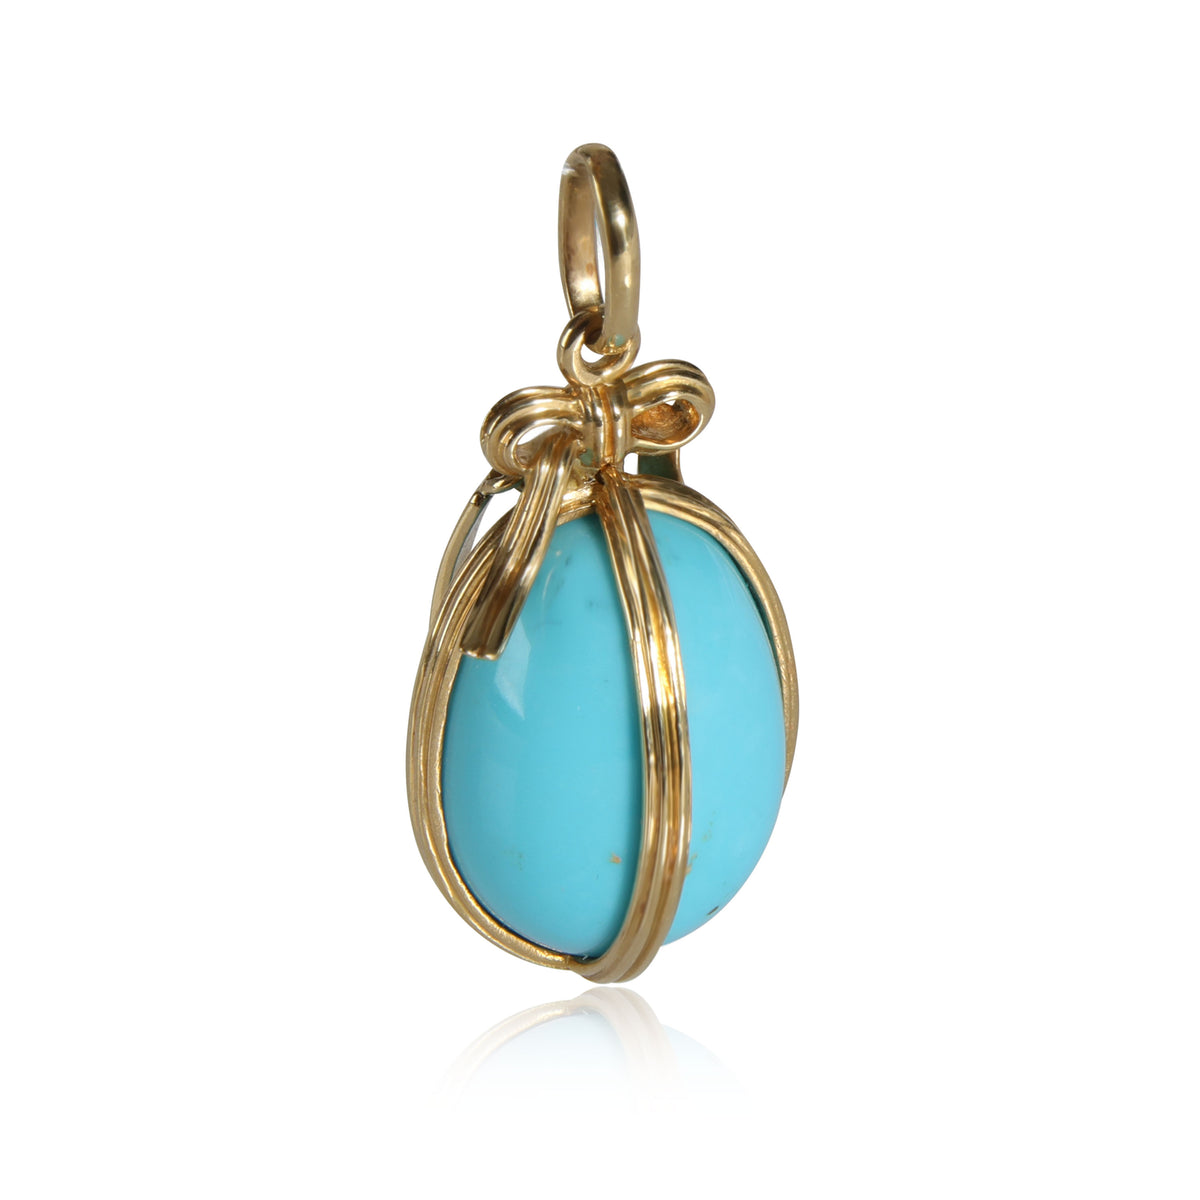 Tiffany & Co. Schlumberger Turquoise Egg Charm in 18K Yellow Gold